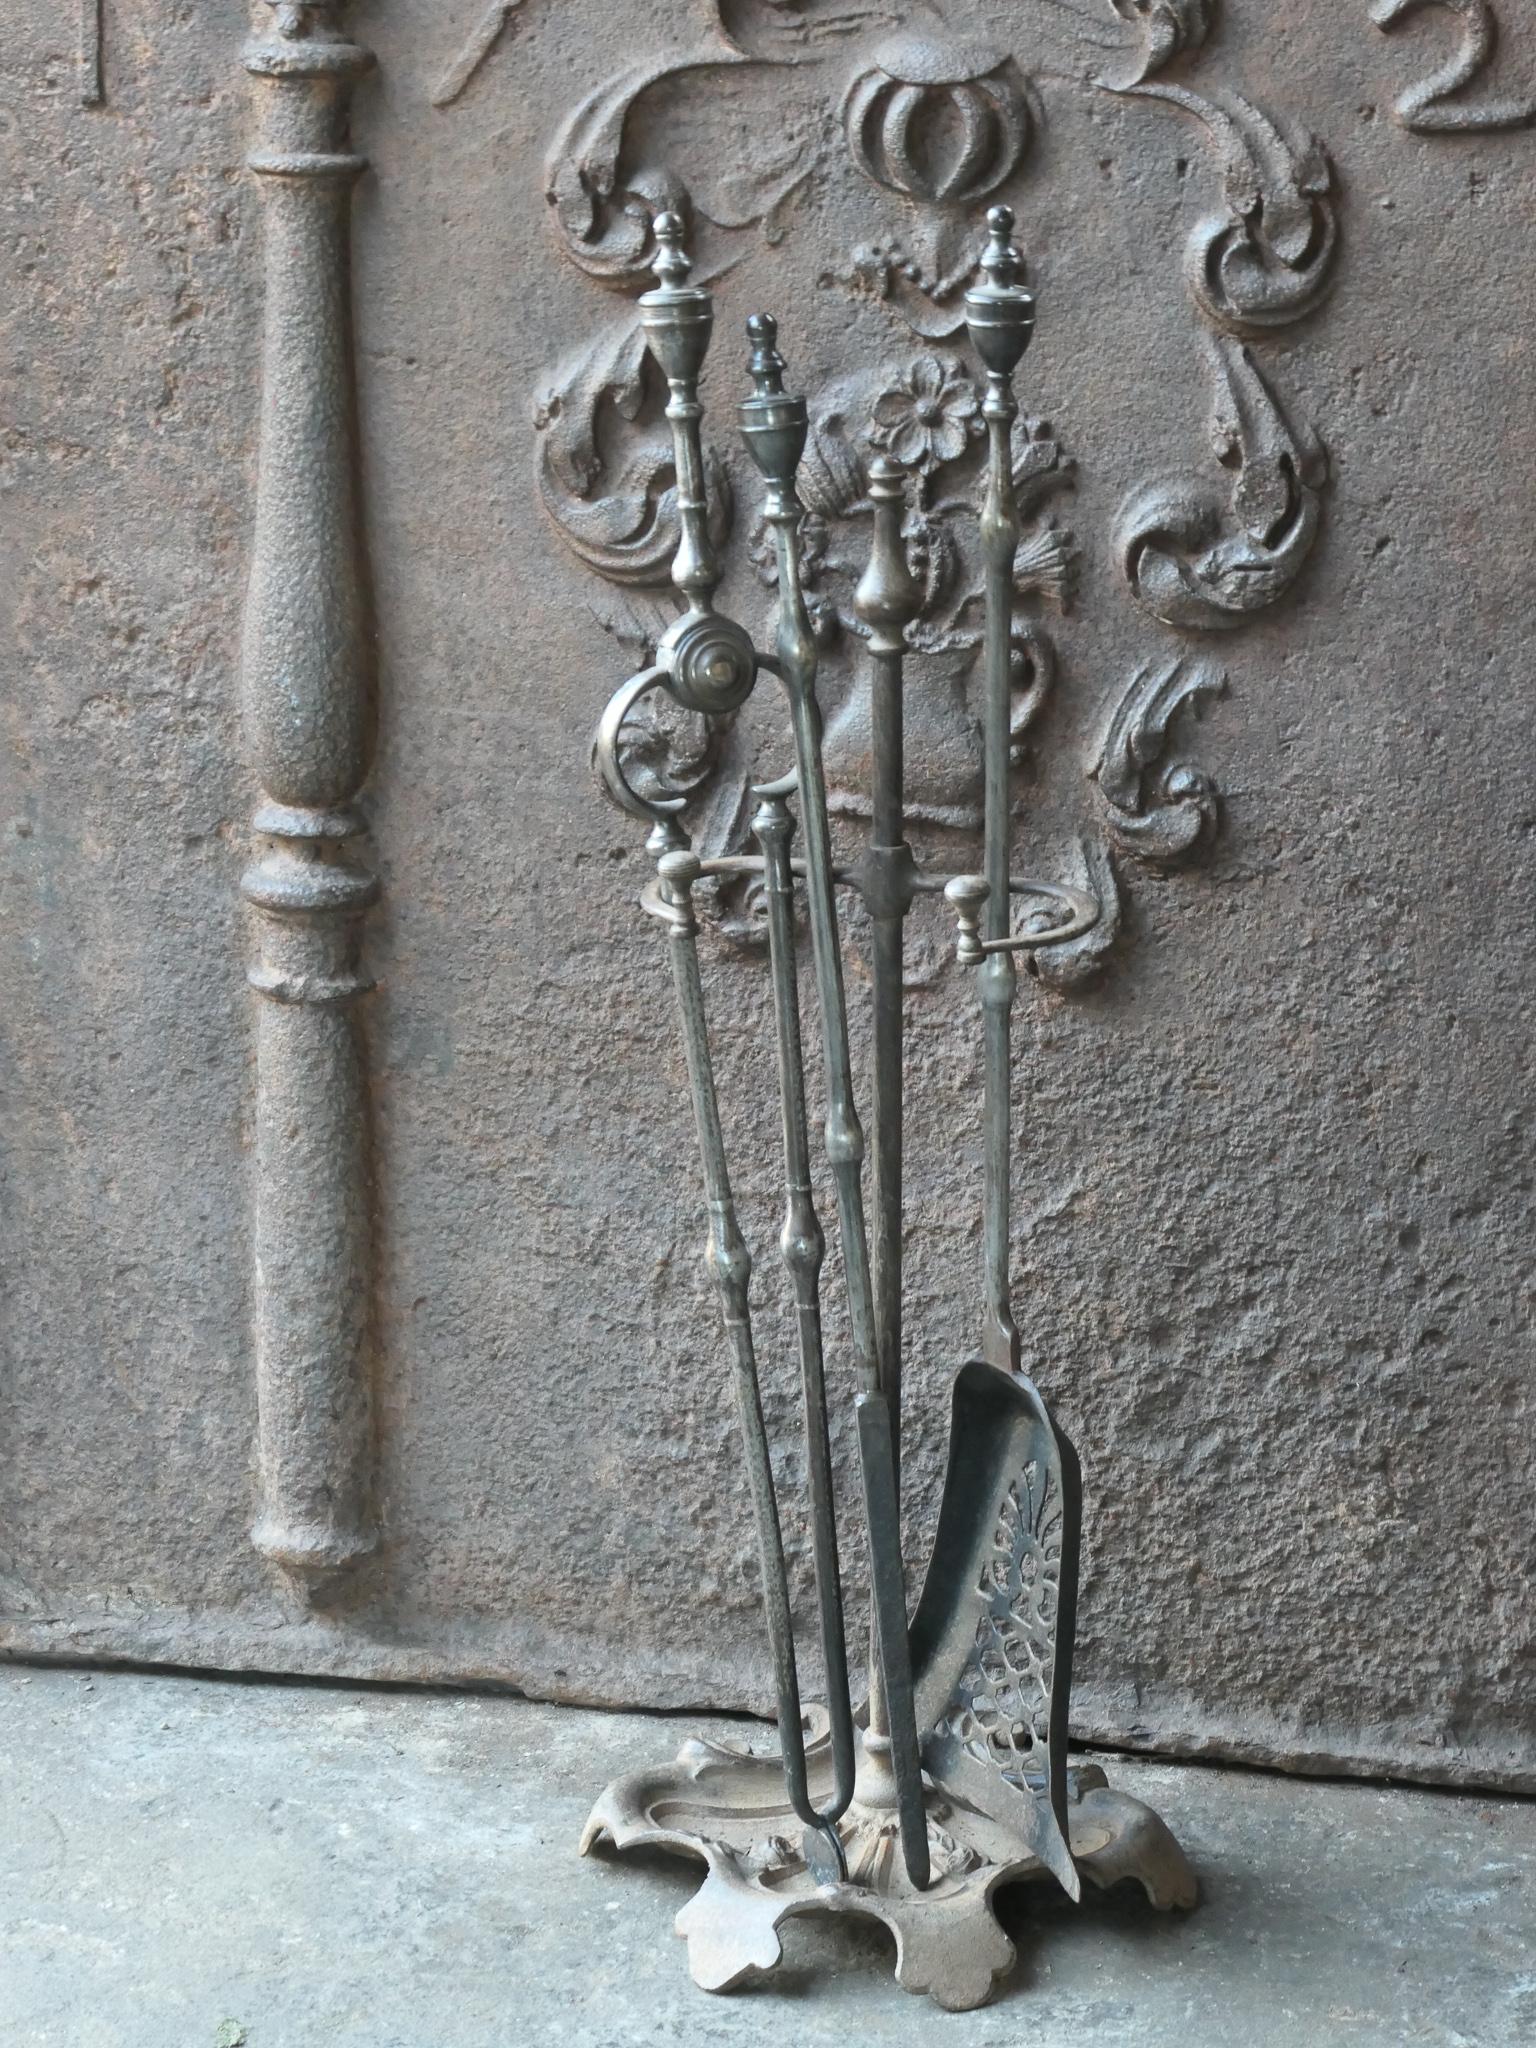 18/19th Century English Georgian fireside companion set. The tool set consists of thongs, shovel, poker and stand. Made of cast iron (stand) and wrought iron (tools). It is in a good condition and is fully functional.